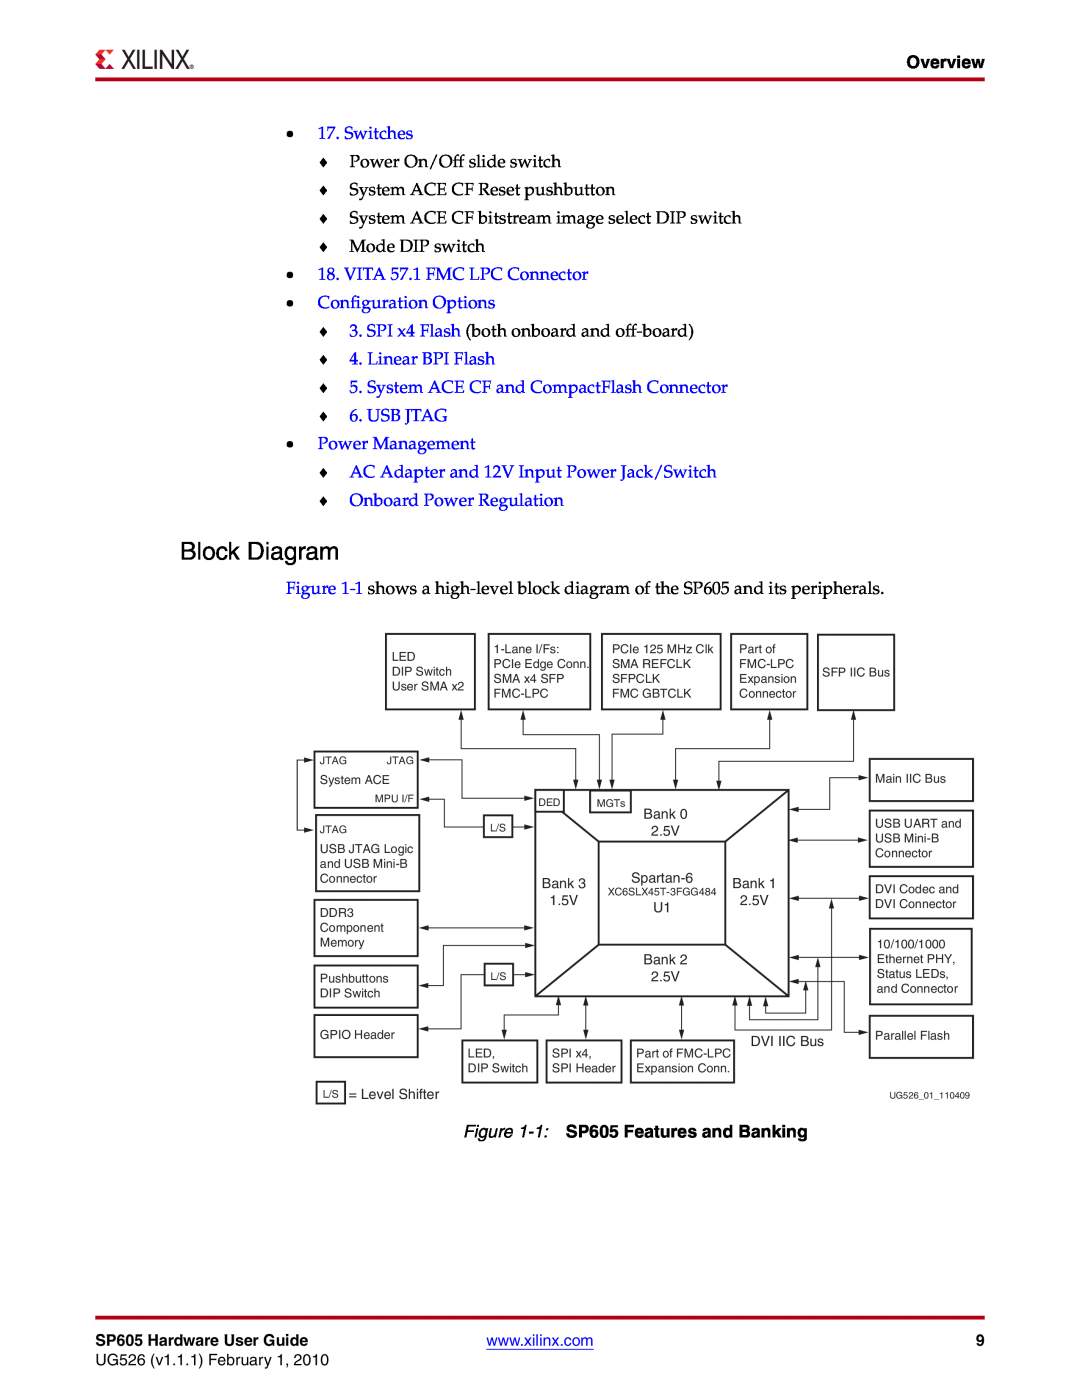 Xilinx SP605 Block Diagram, Overview, Switches, VITA 57.1 FMC LPC Connector Configuration Options, UG526 v1.1.1 February 1 